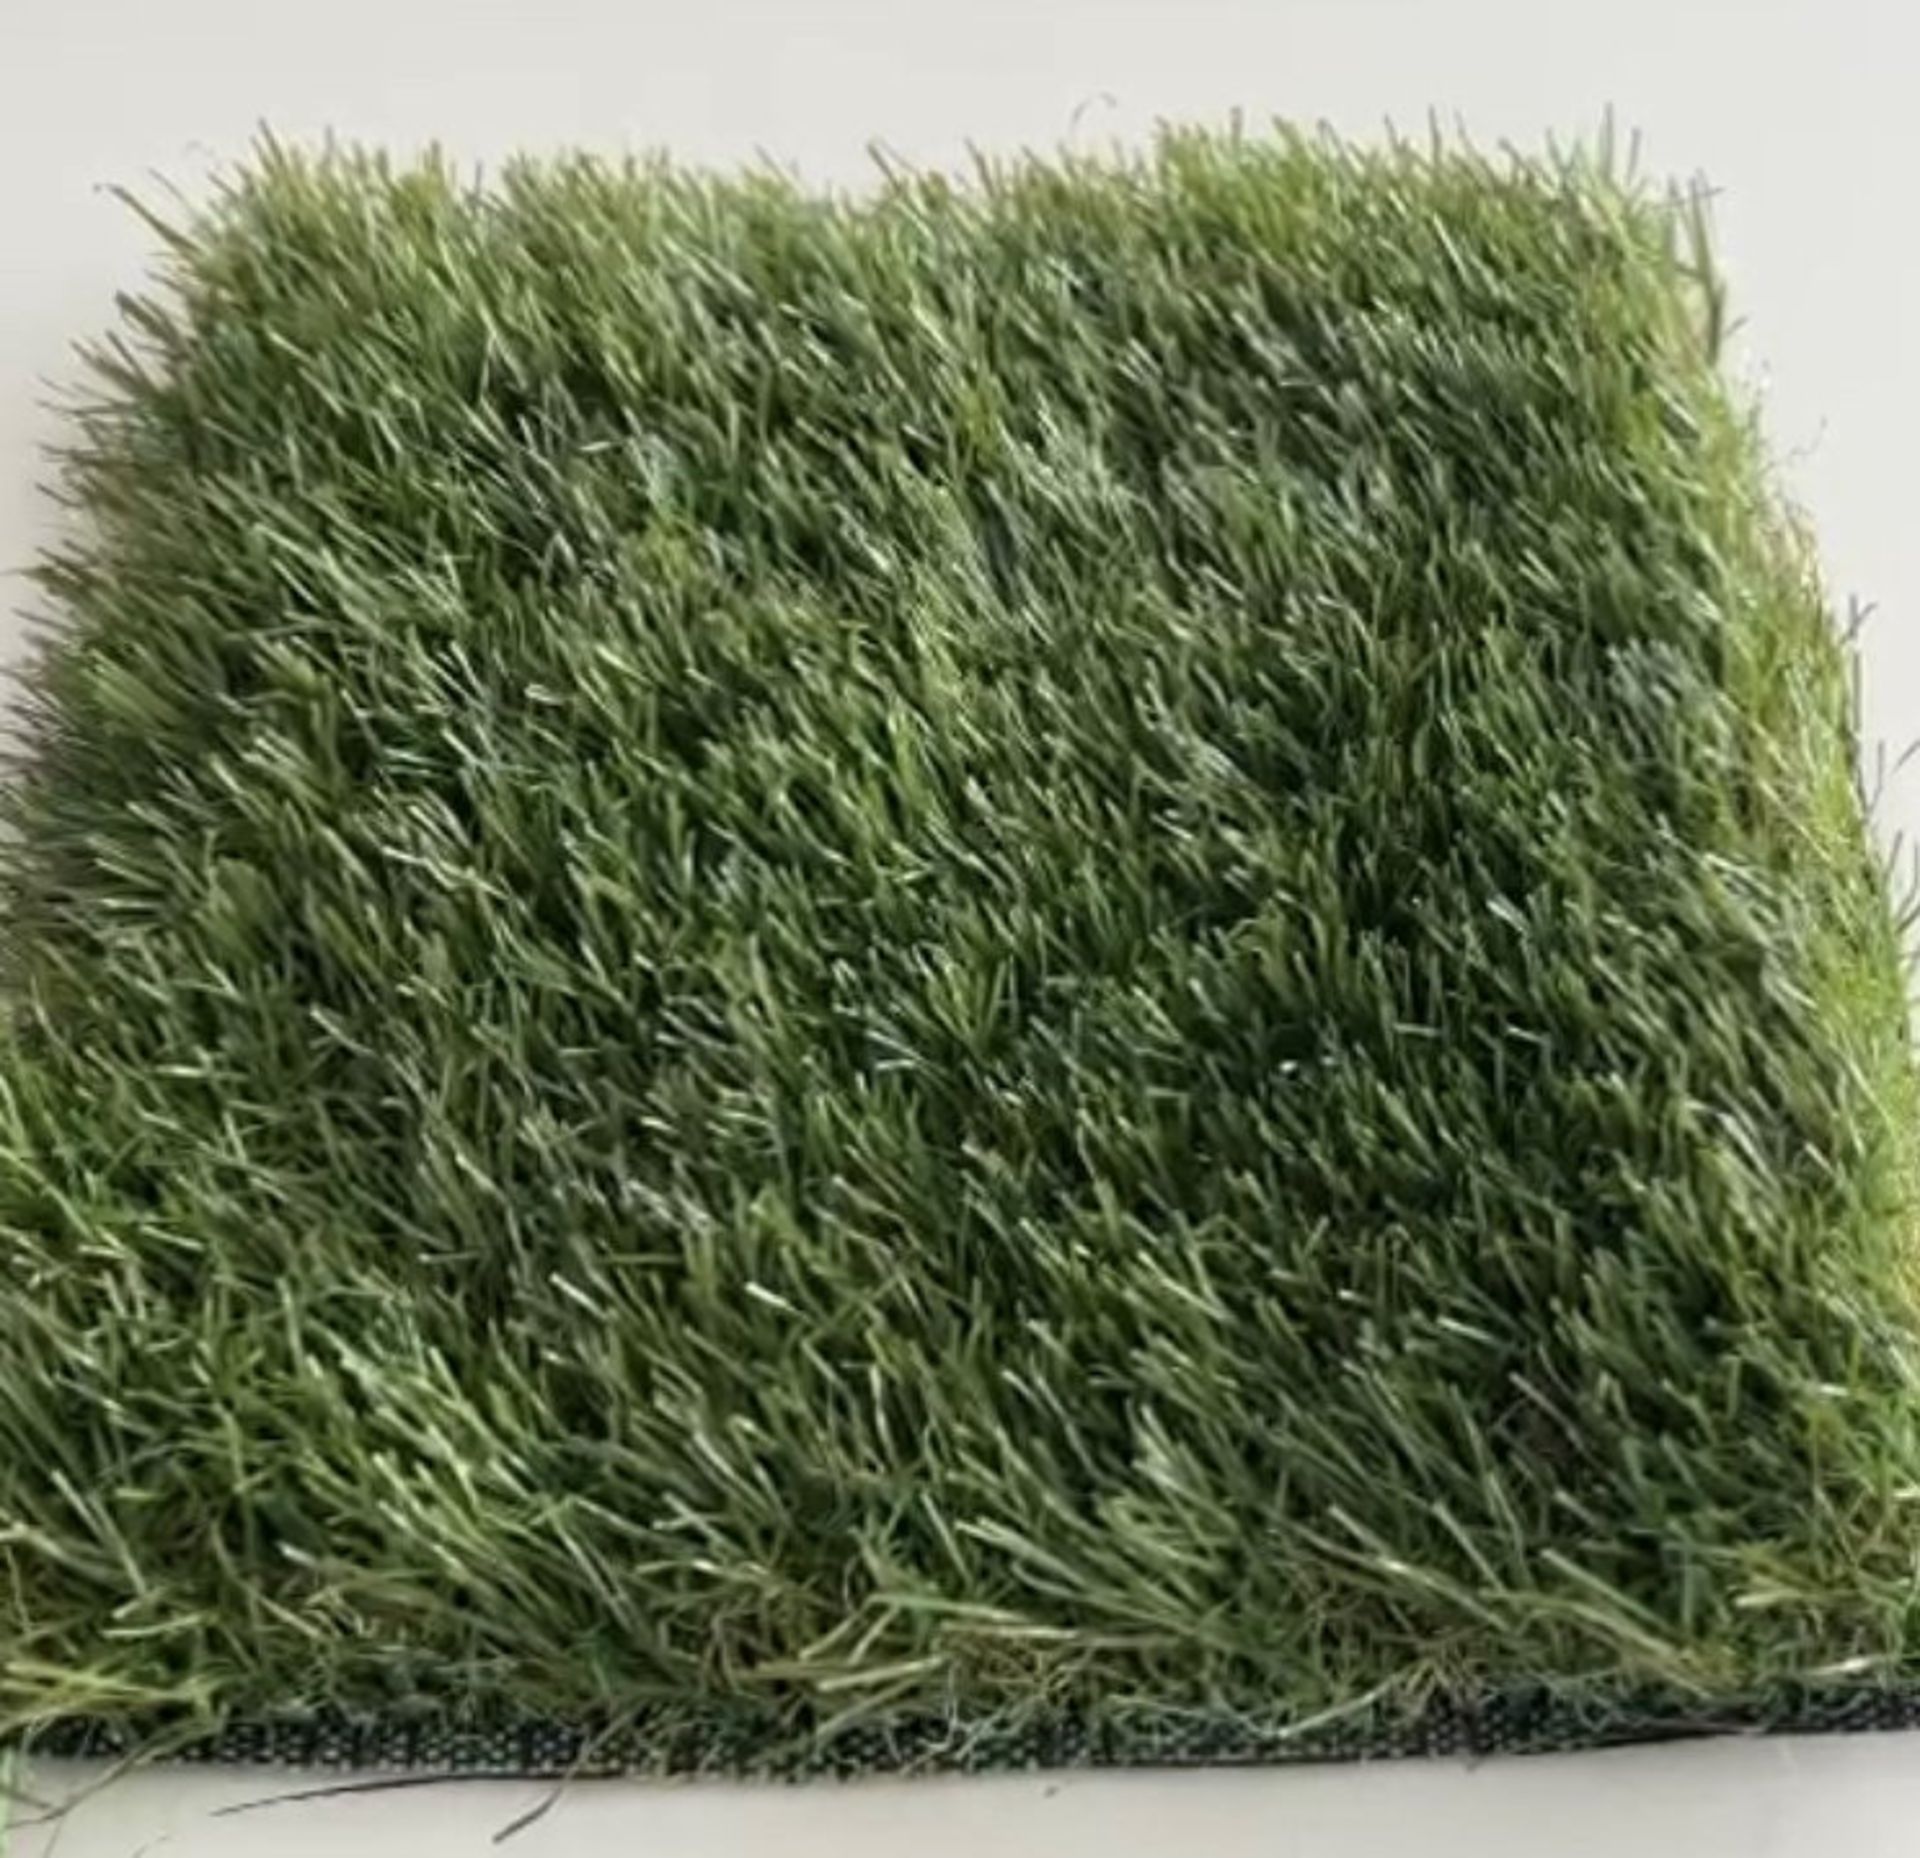 1 x Heavyweight Artificial Garden Grass - 40Mm Thick - 17.5X5M Roll - Rrp £32.99 Per Square - Image 4 of 5